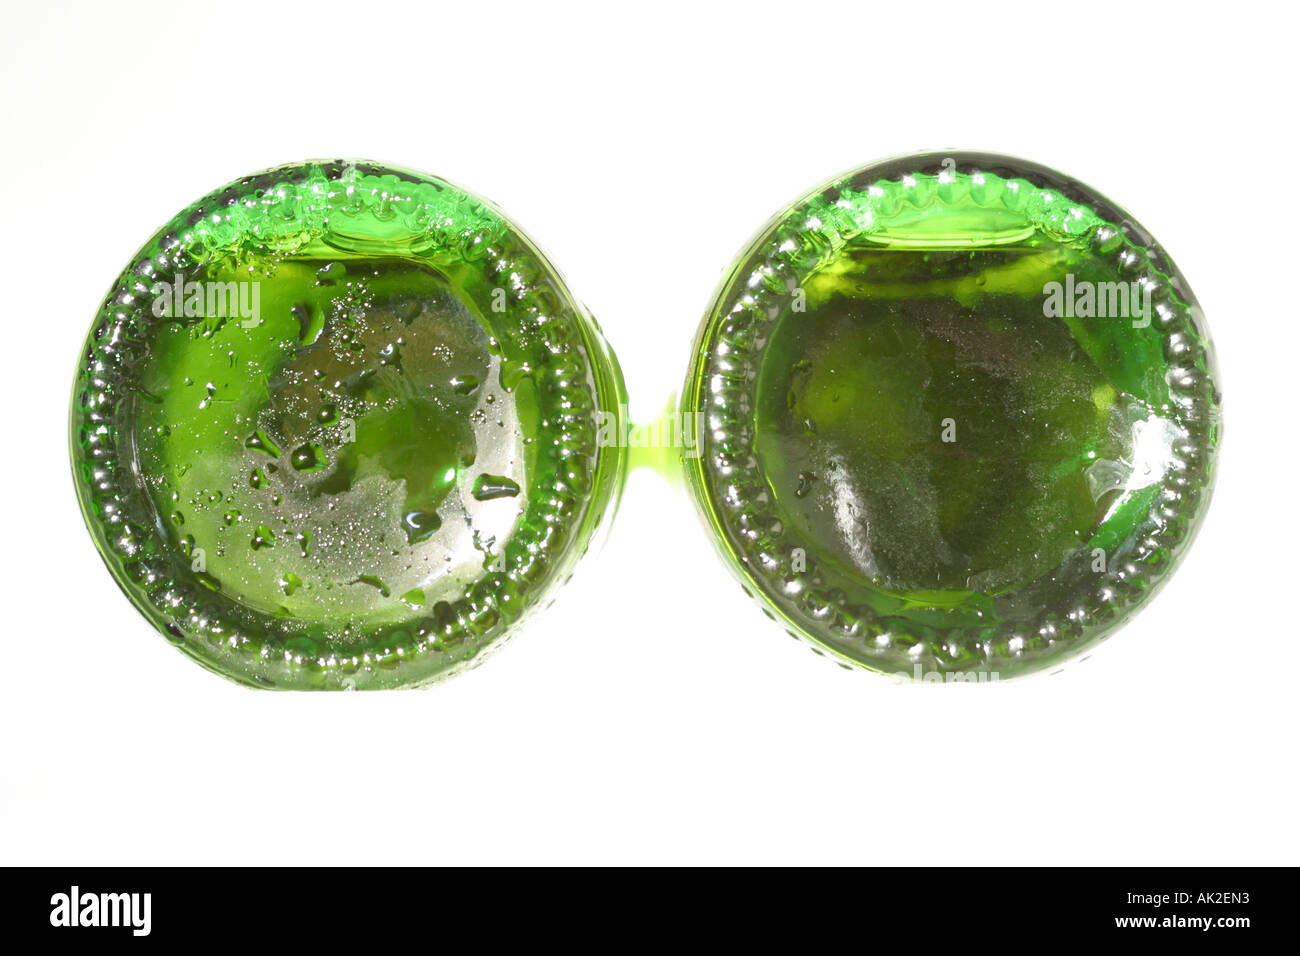 Two green glass beer bottles Stock Photo